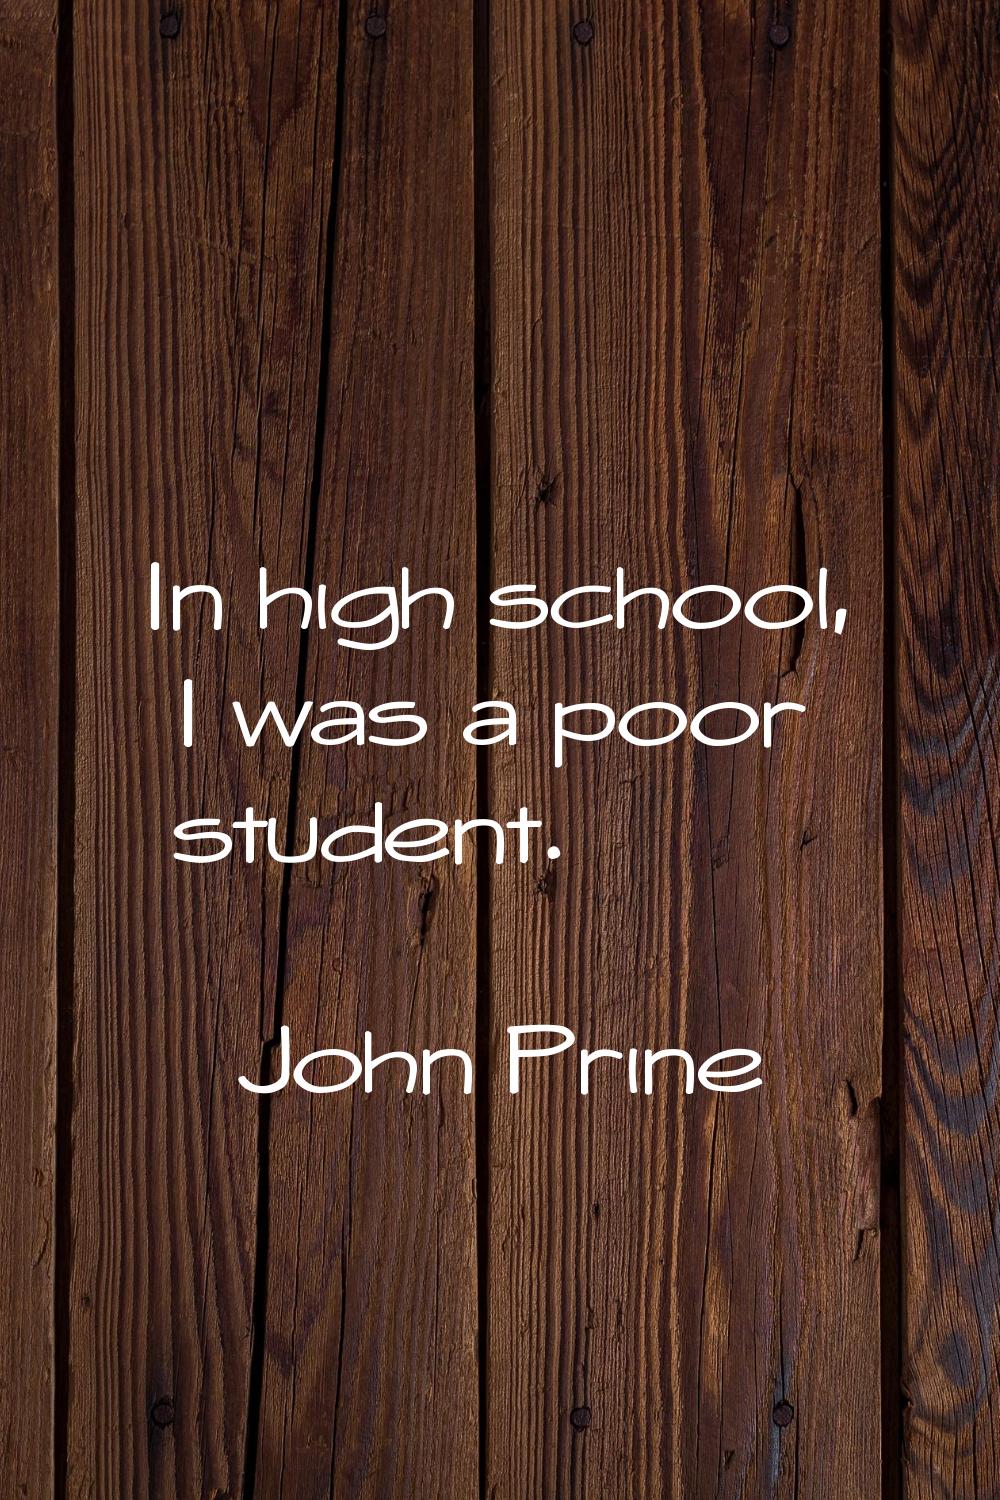 In high school, I was a poor student.